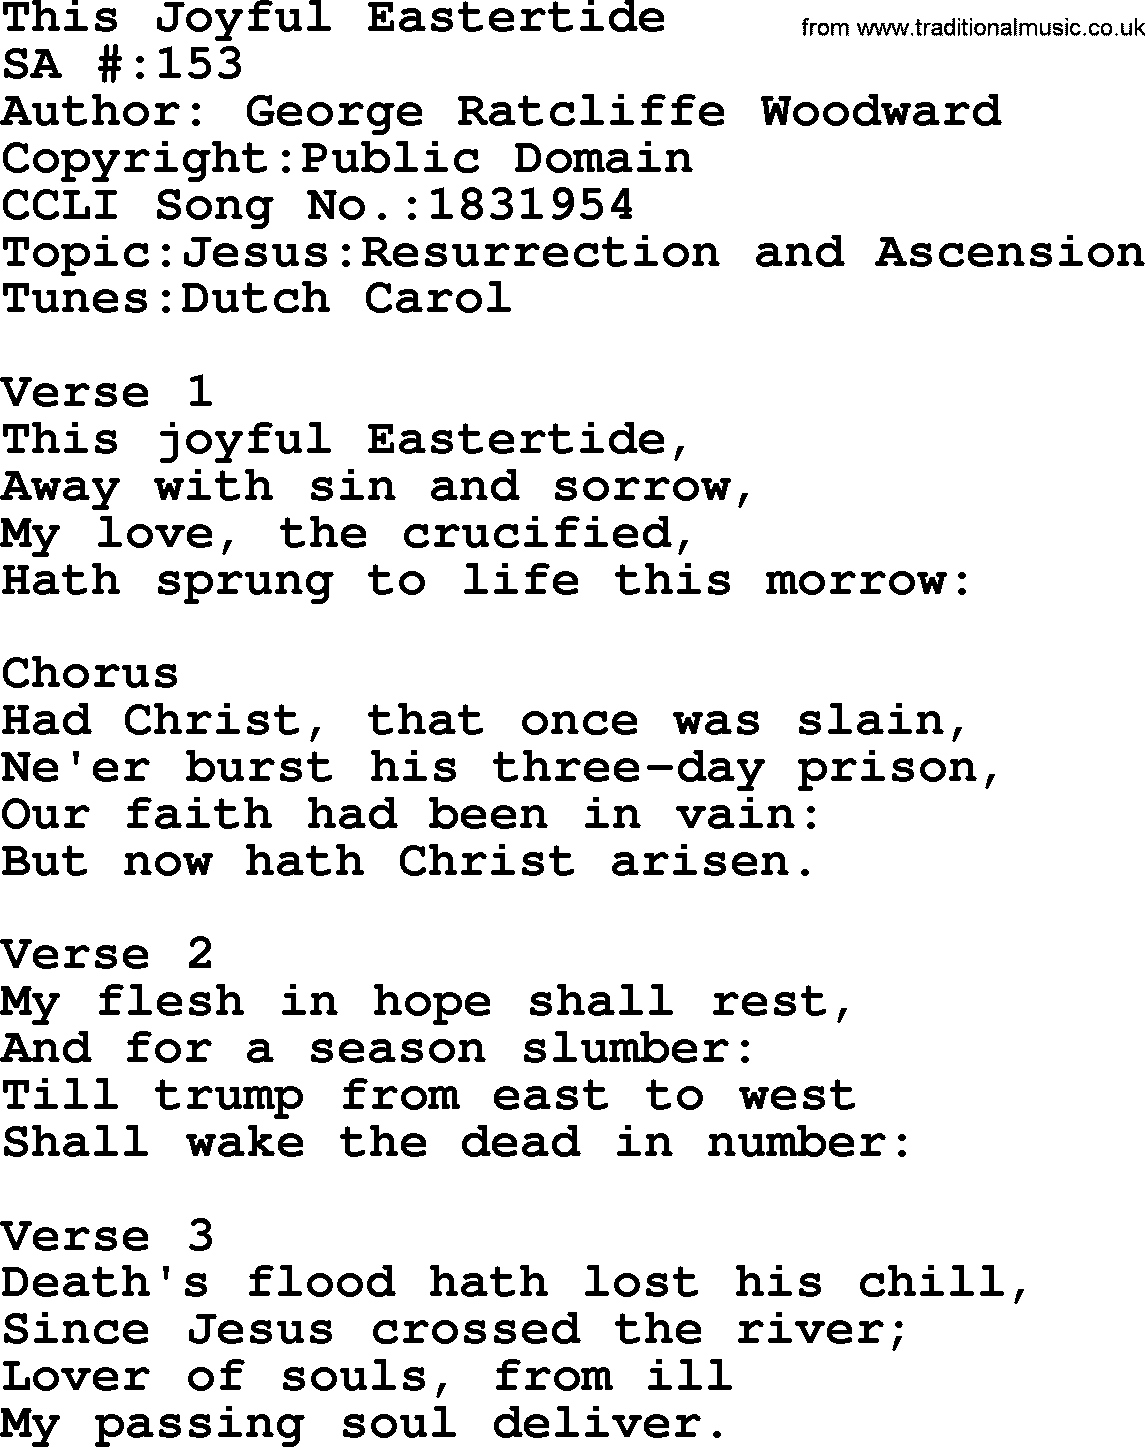 Salvation Army Hymnal, title: This Joyful Eastertide, with lyrics and PDF,